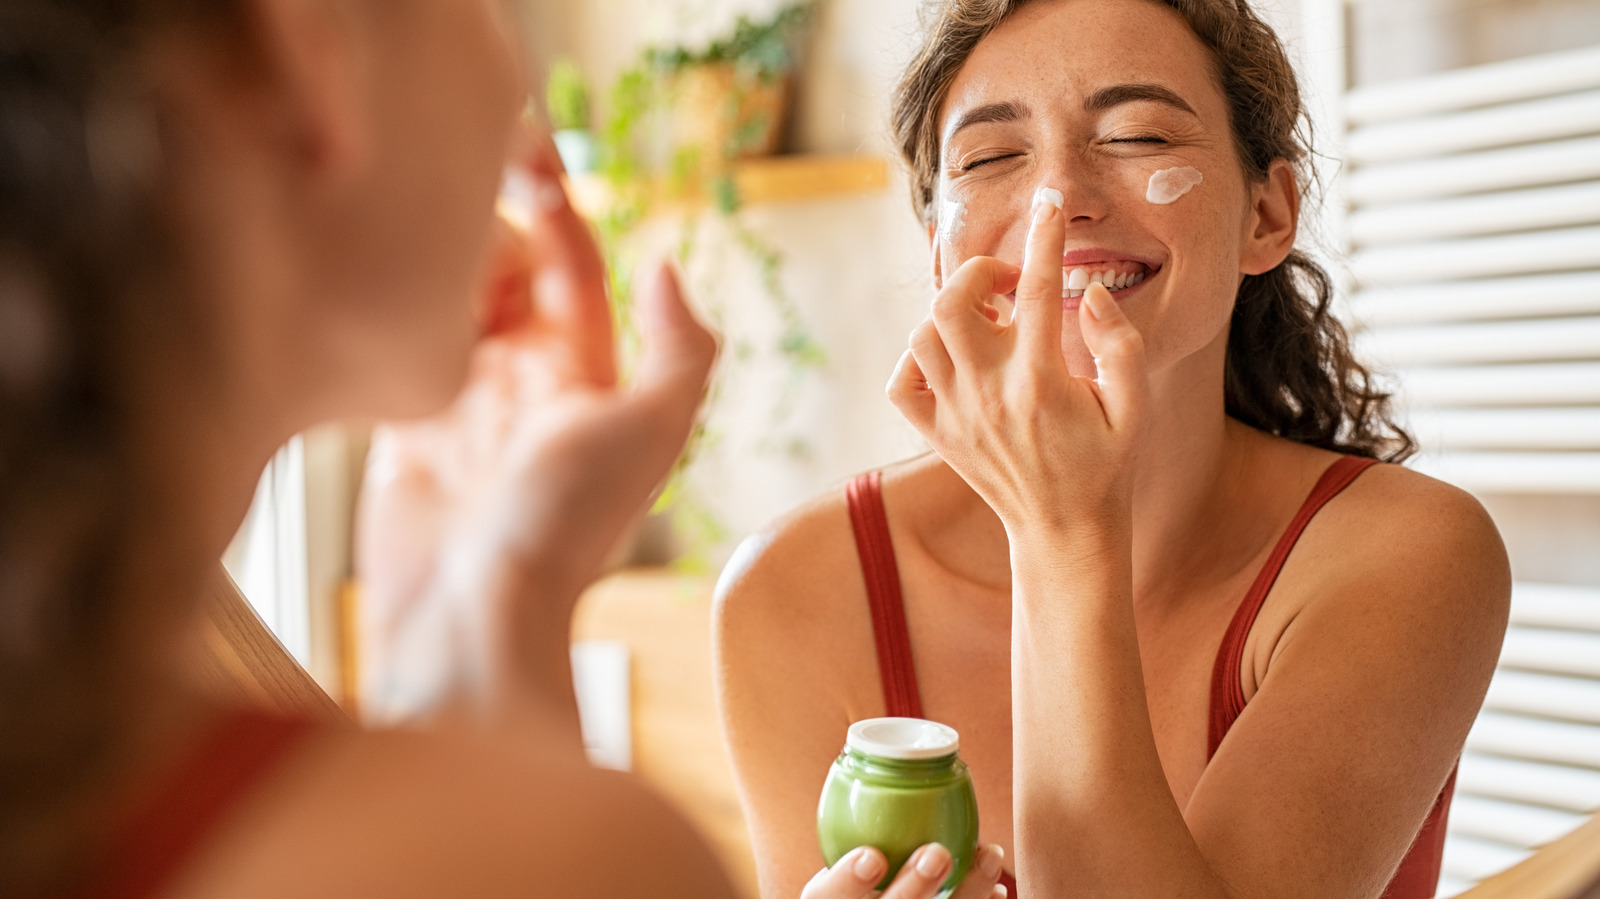 The Difference Between Hydrating And Moisturizing Your Skin